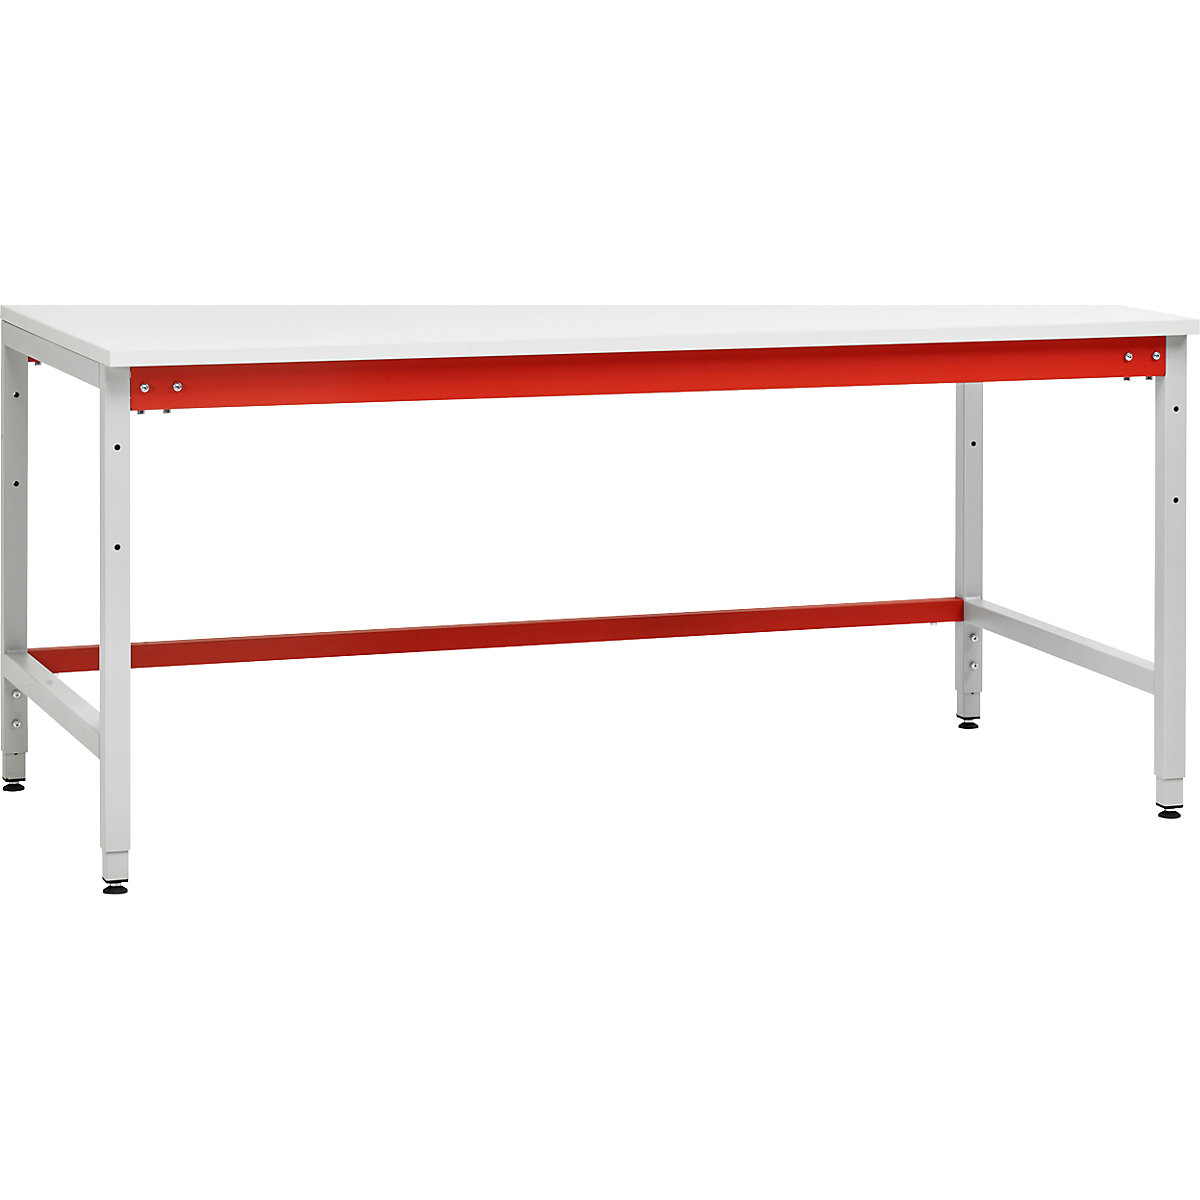 Packing table, standard, HxWxD 780 x 1600 x 900 mm-9